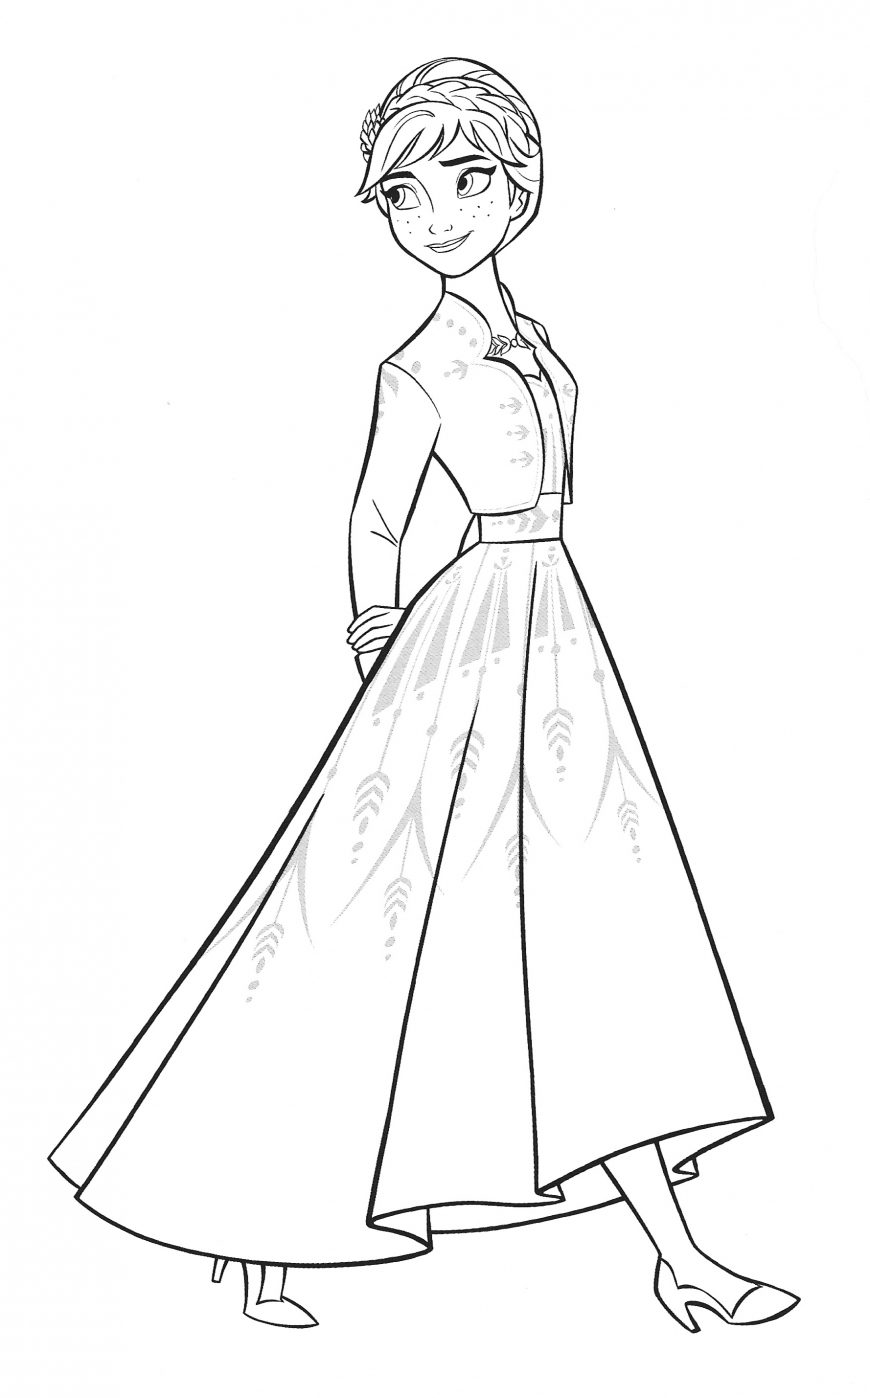 Frozen anna coloring page by variandeservesbetter on